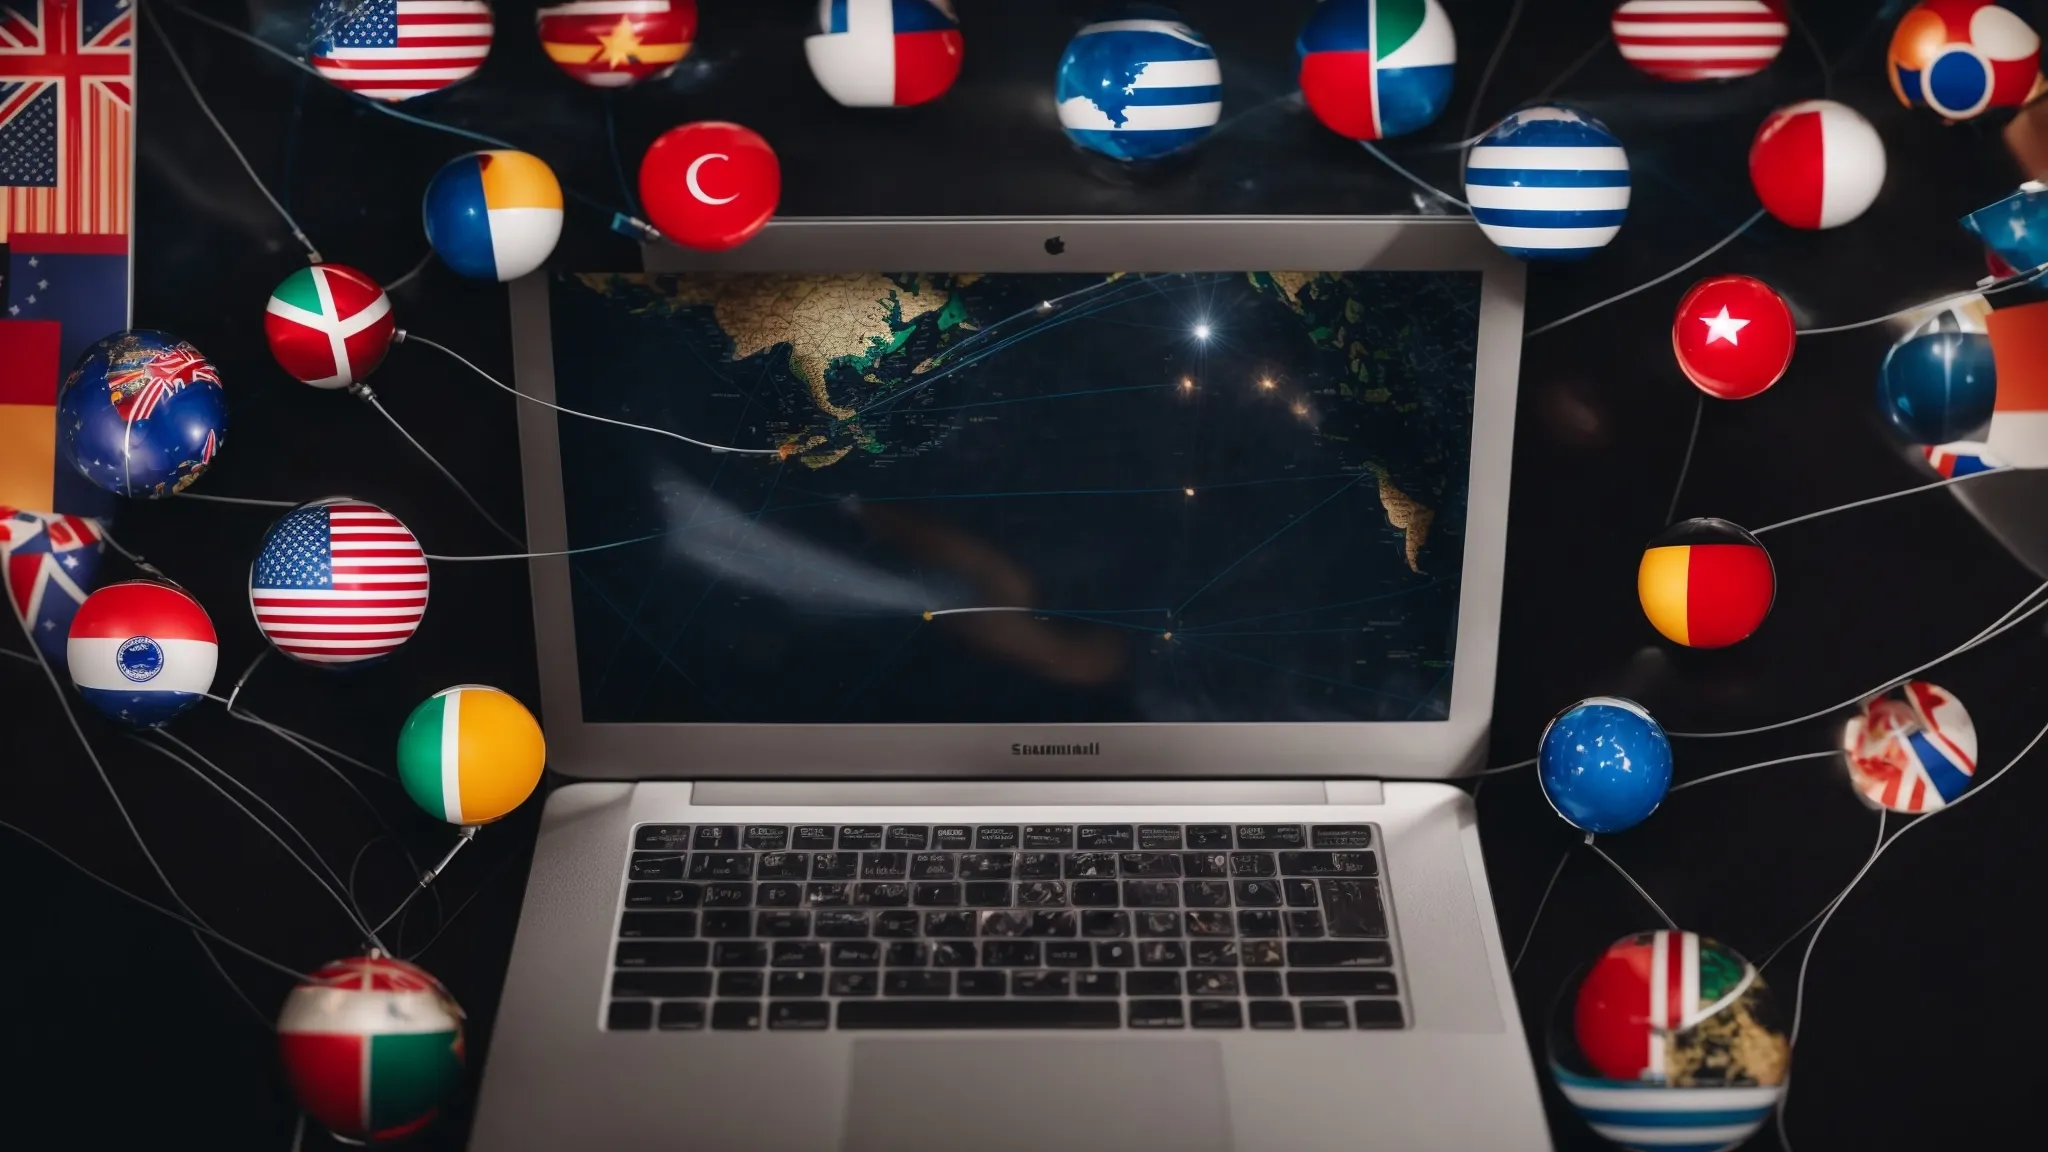 a globe surrounded by various flag icons, all connected by lines to a central laptop displaying a world map.